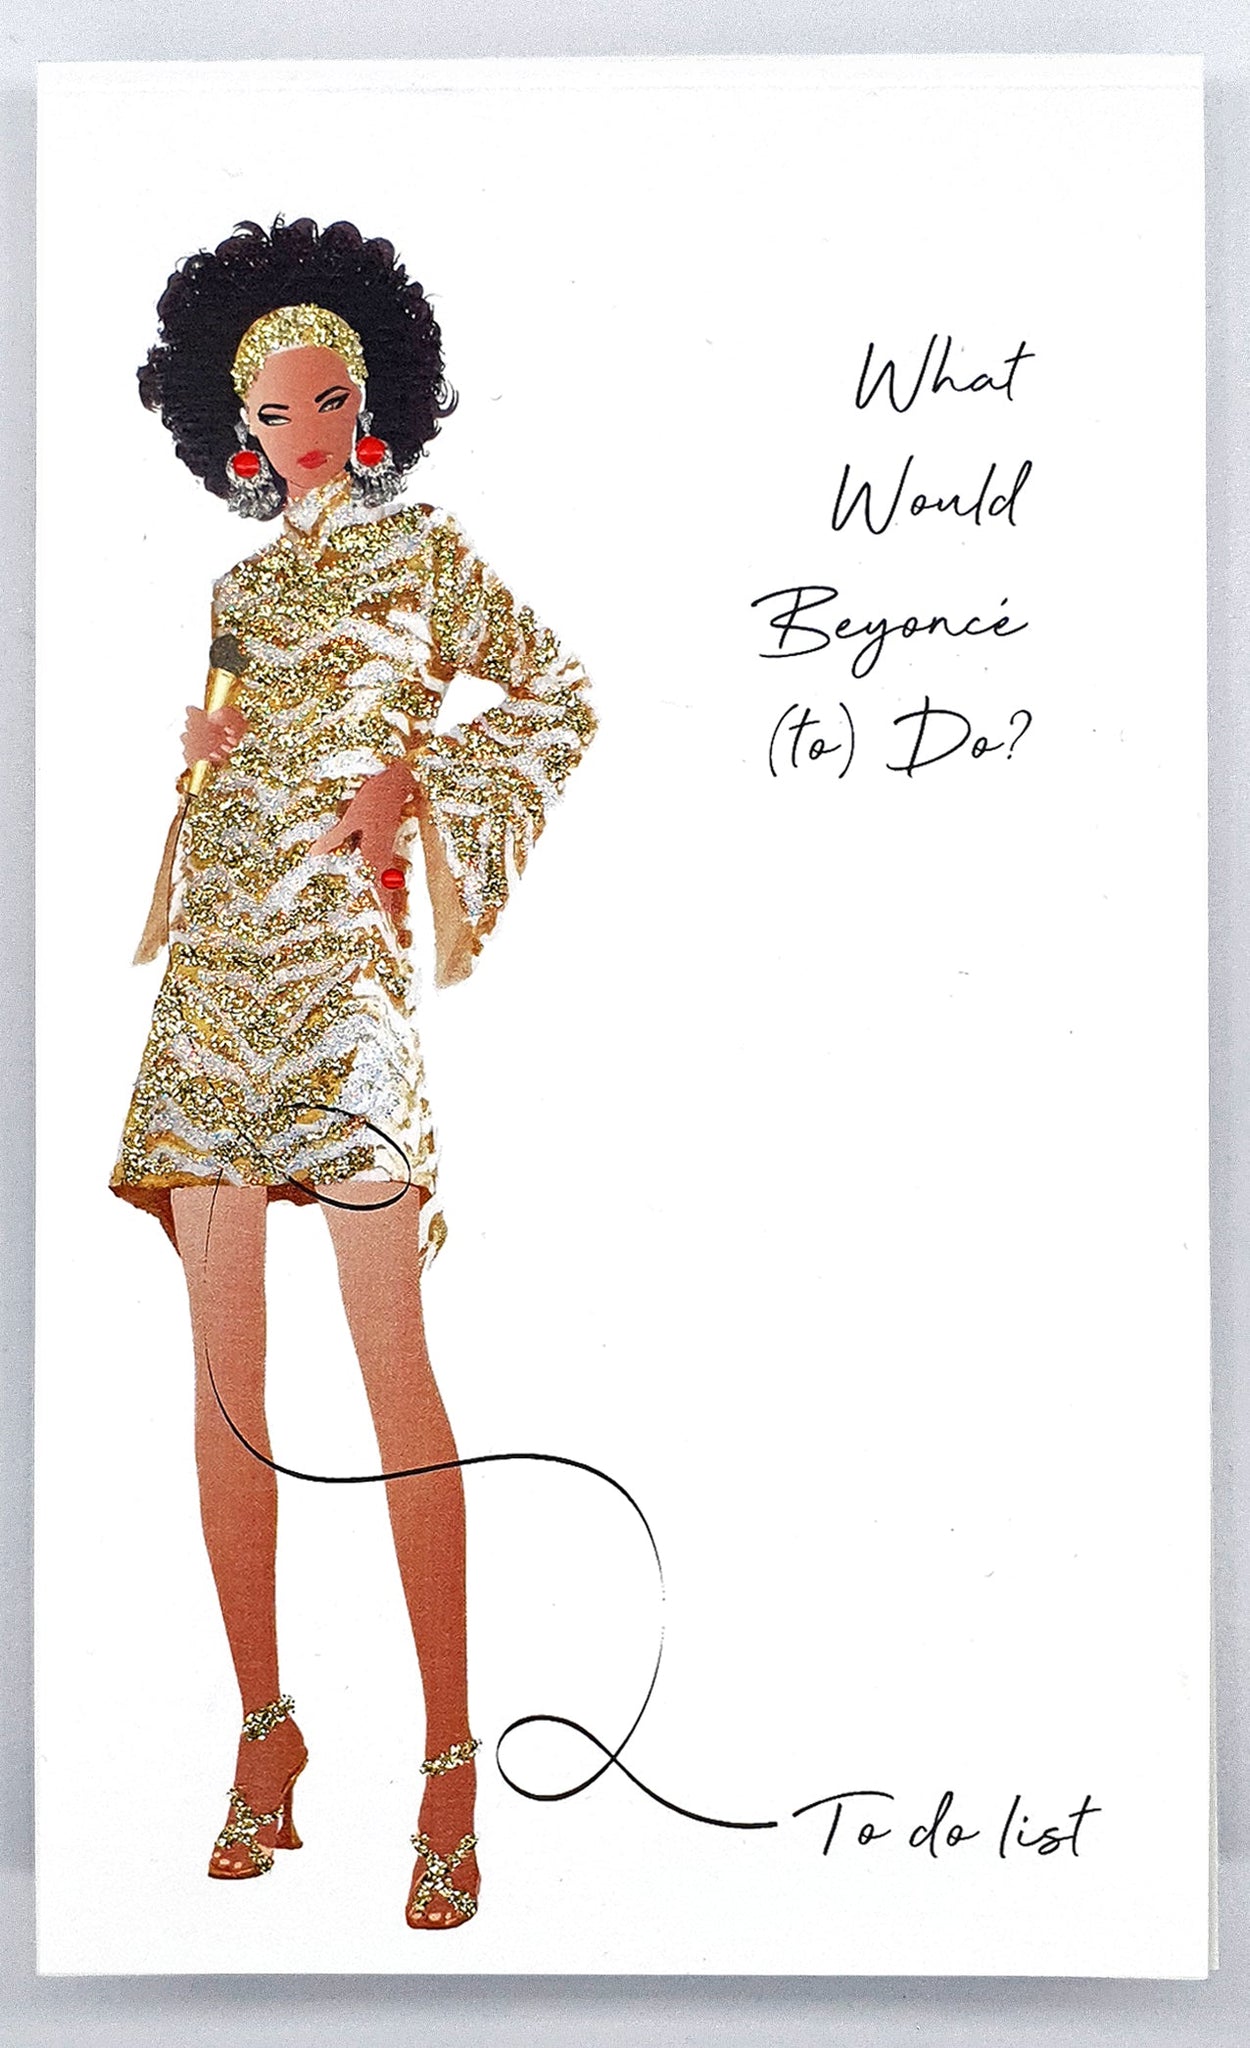 To Do List - What Would Beyoncé (to) Do?